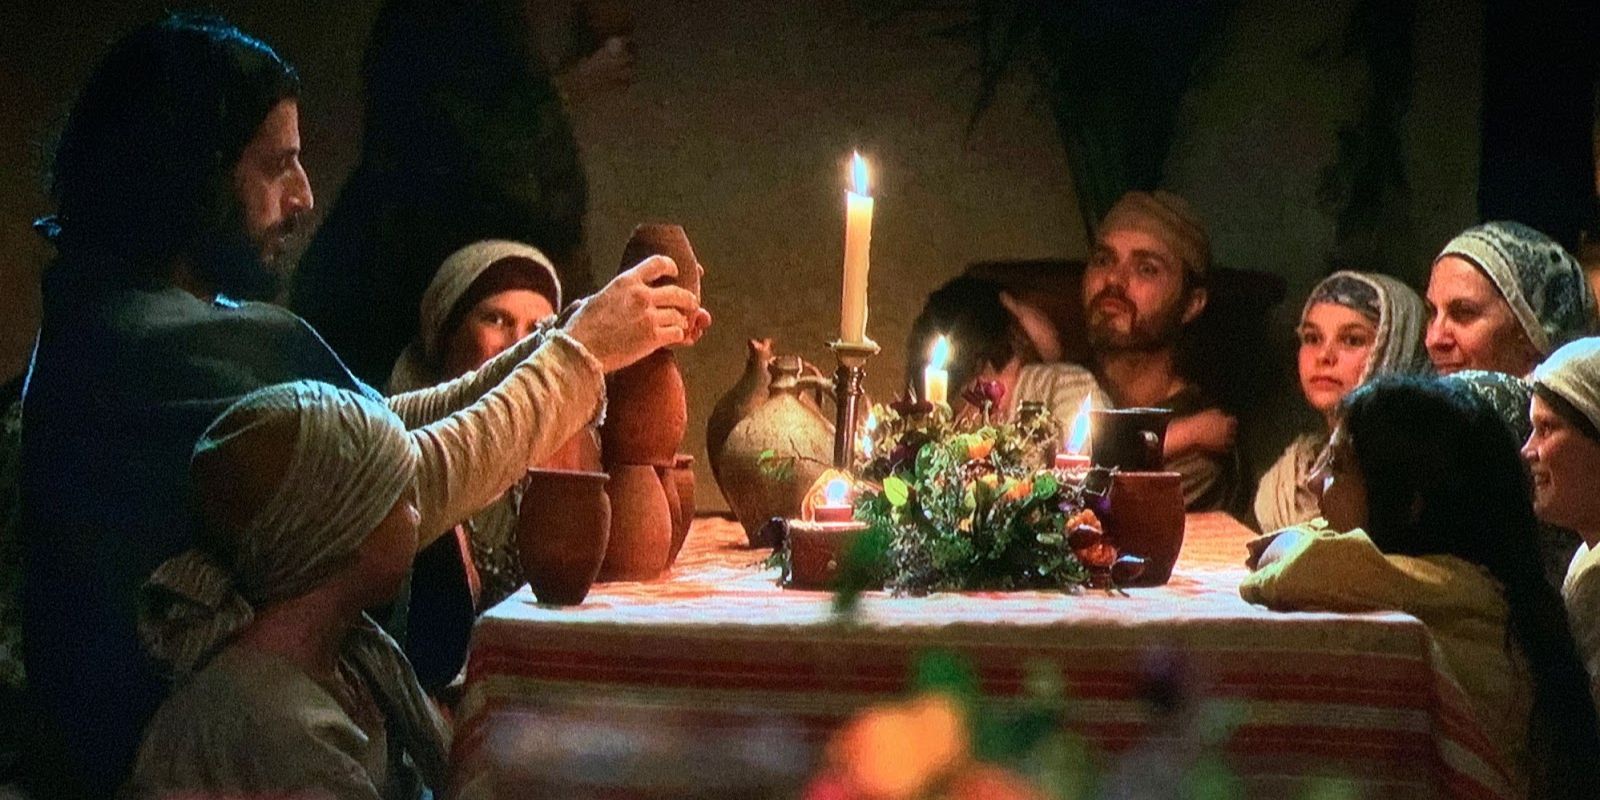 Jesus_at_table_with_family_The_Chosen